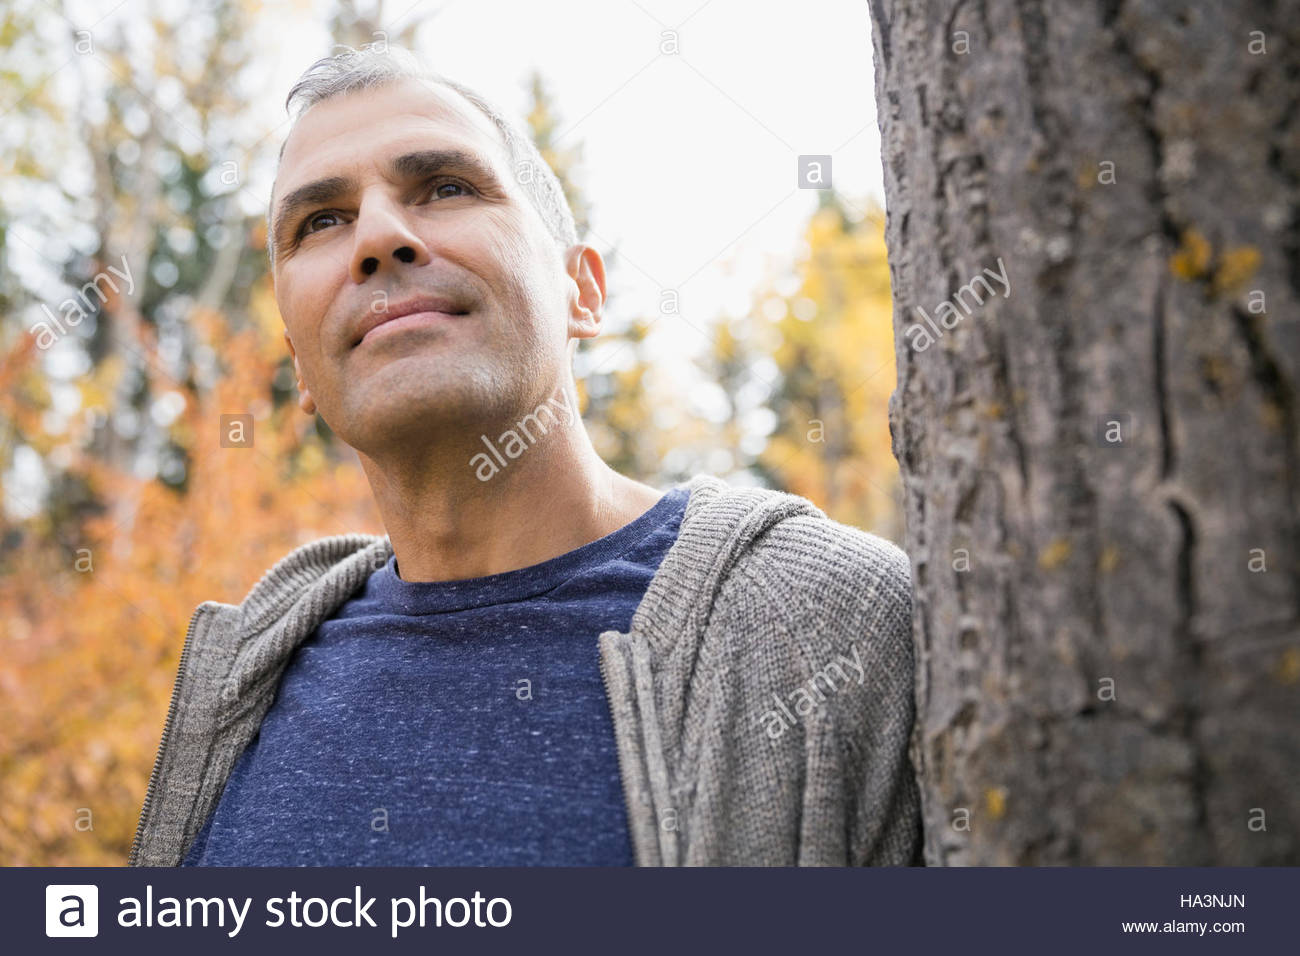 Pensive man leaning on tree trunk looking away Stock Photo